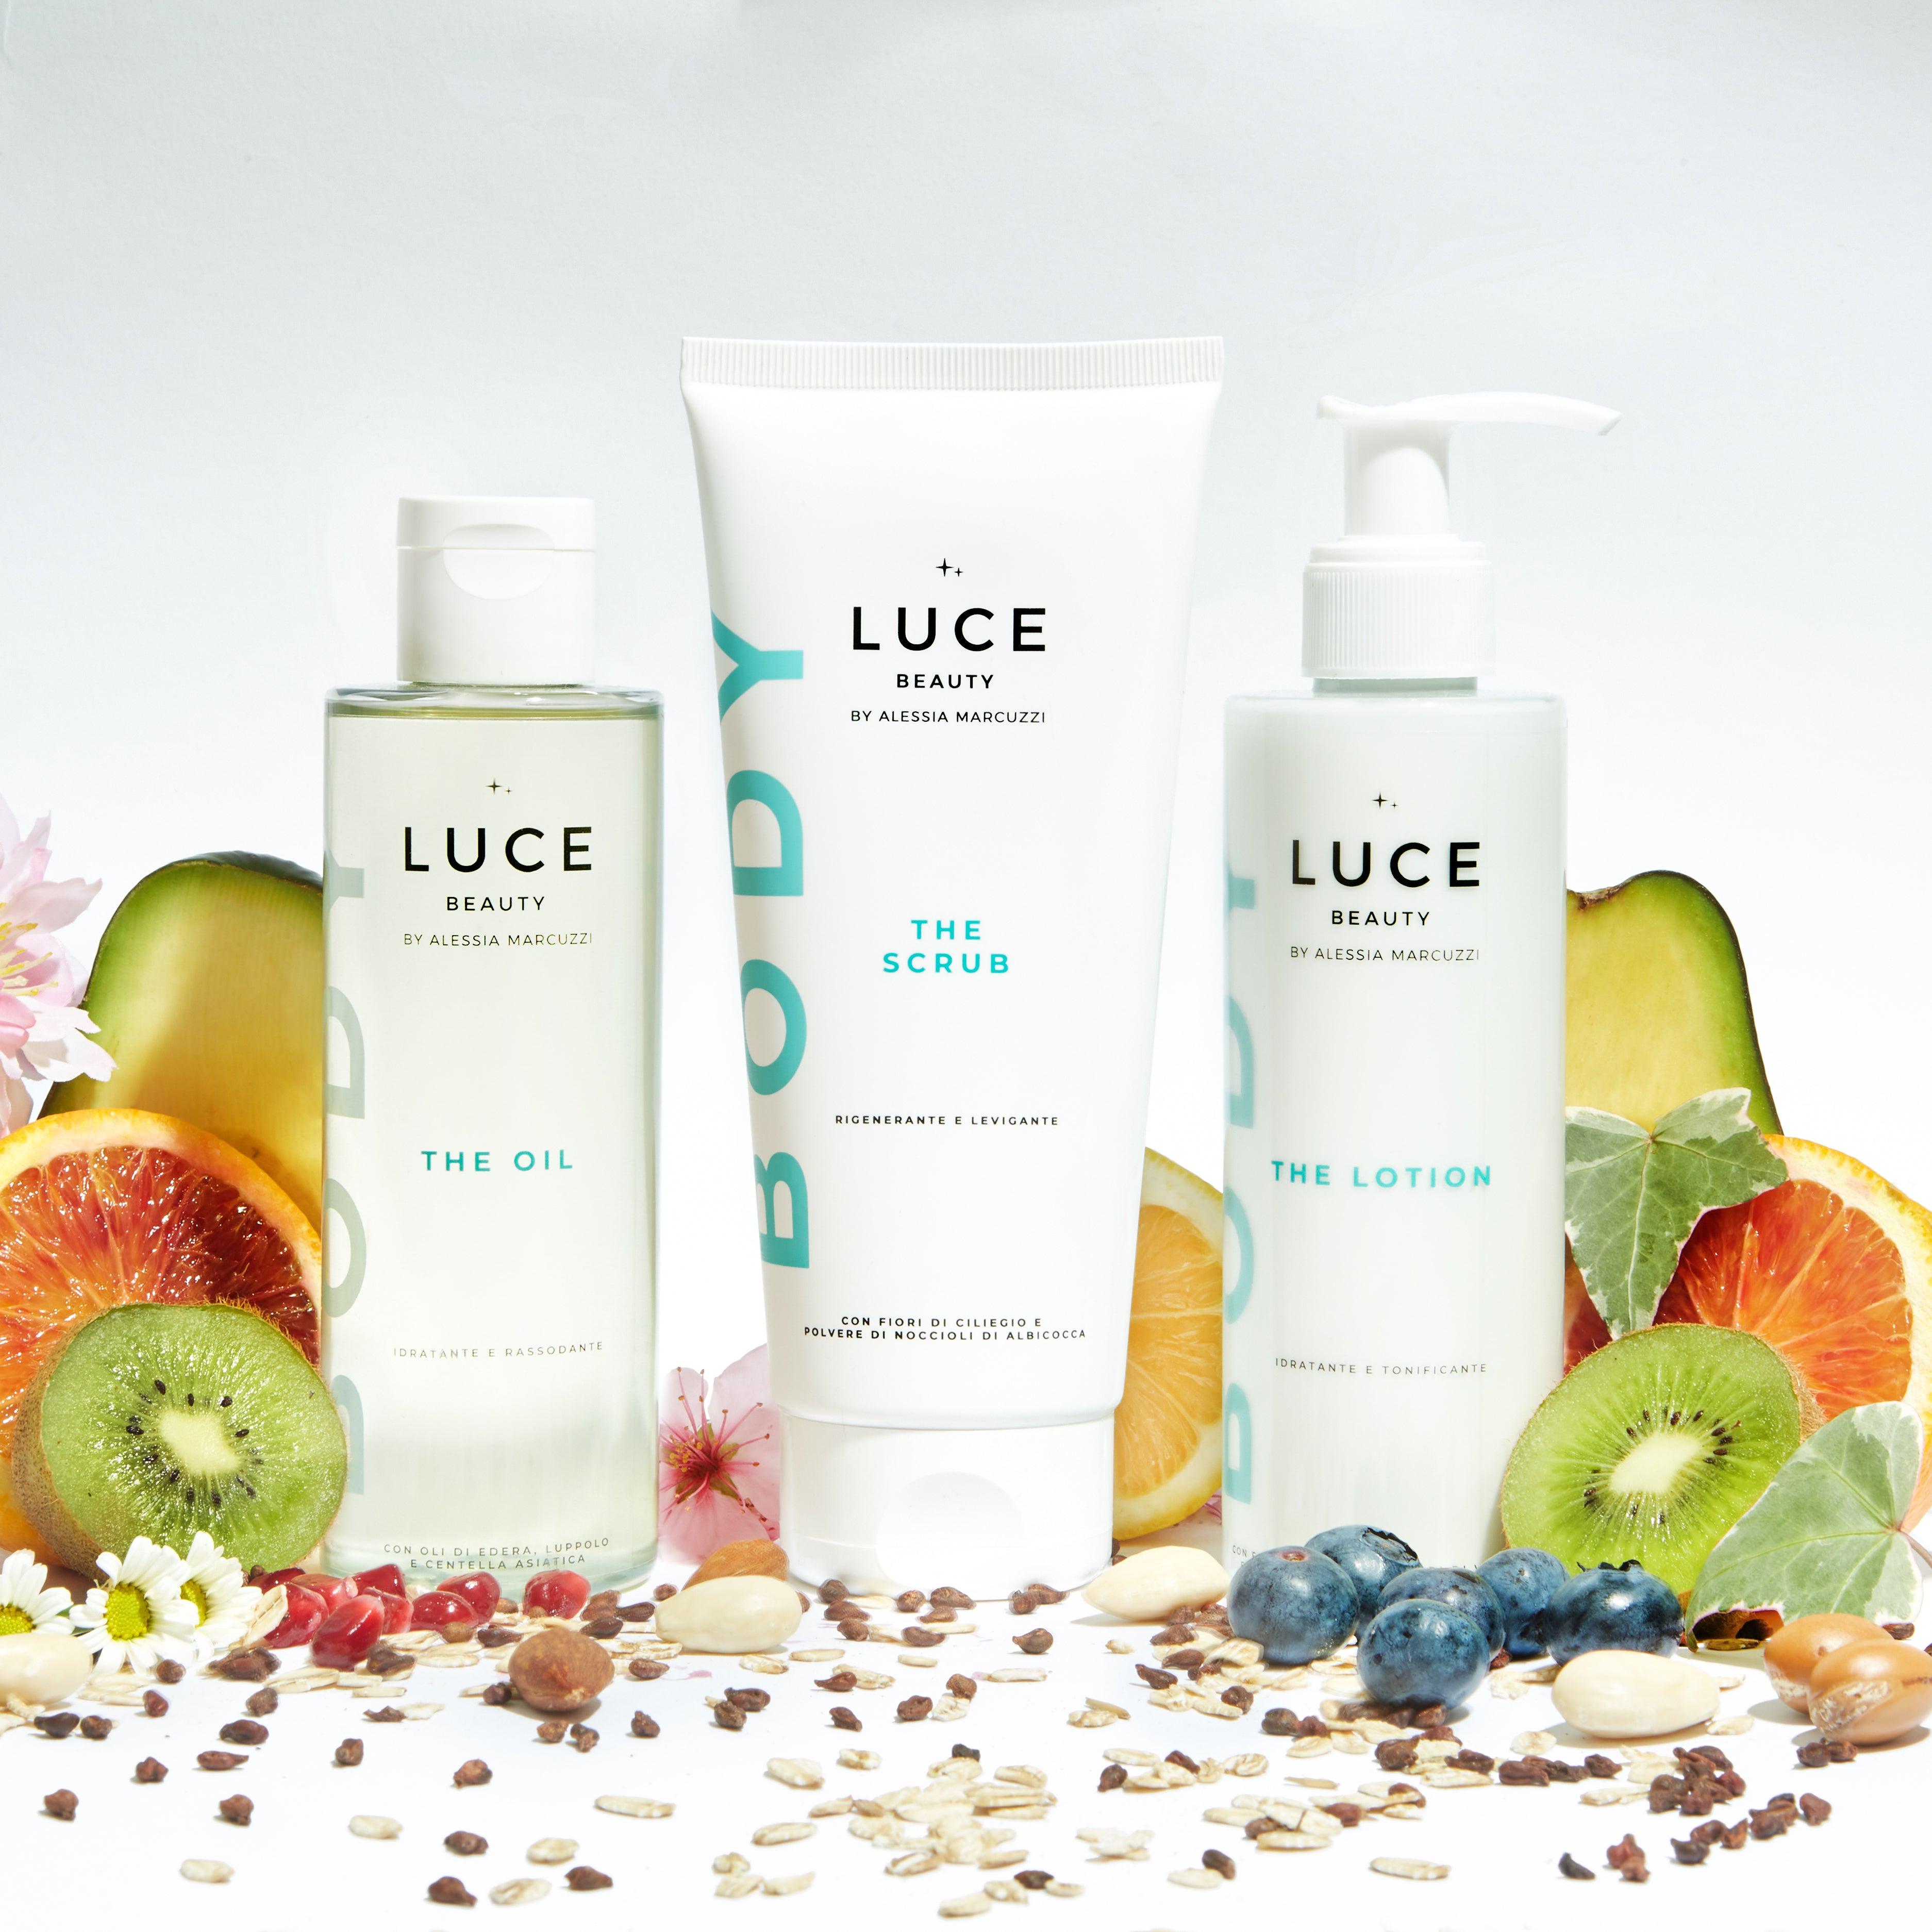 The Body Routine - The lotion, the oil, the scrub - ingredienti - Luce Beauty by Alessia Marcuzzi